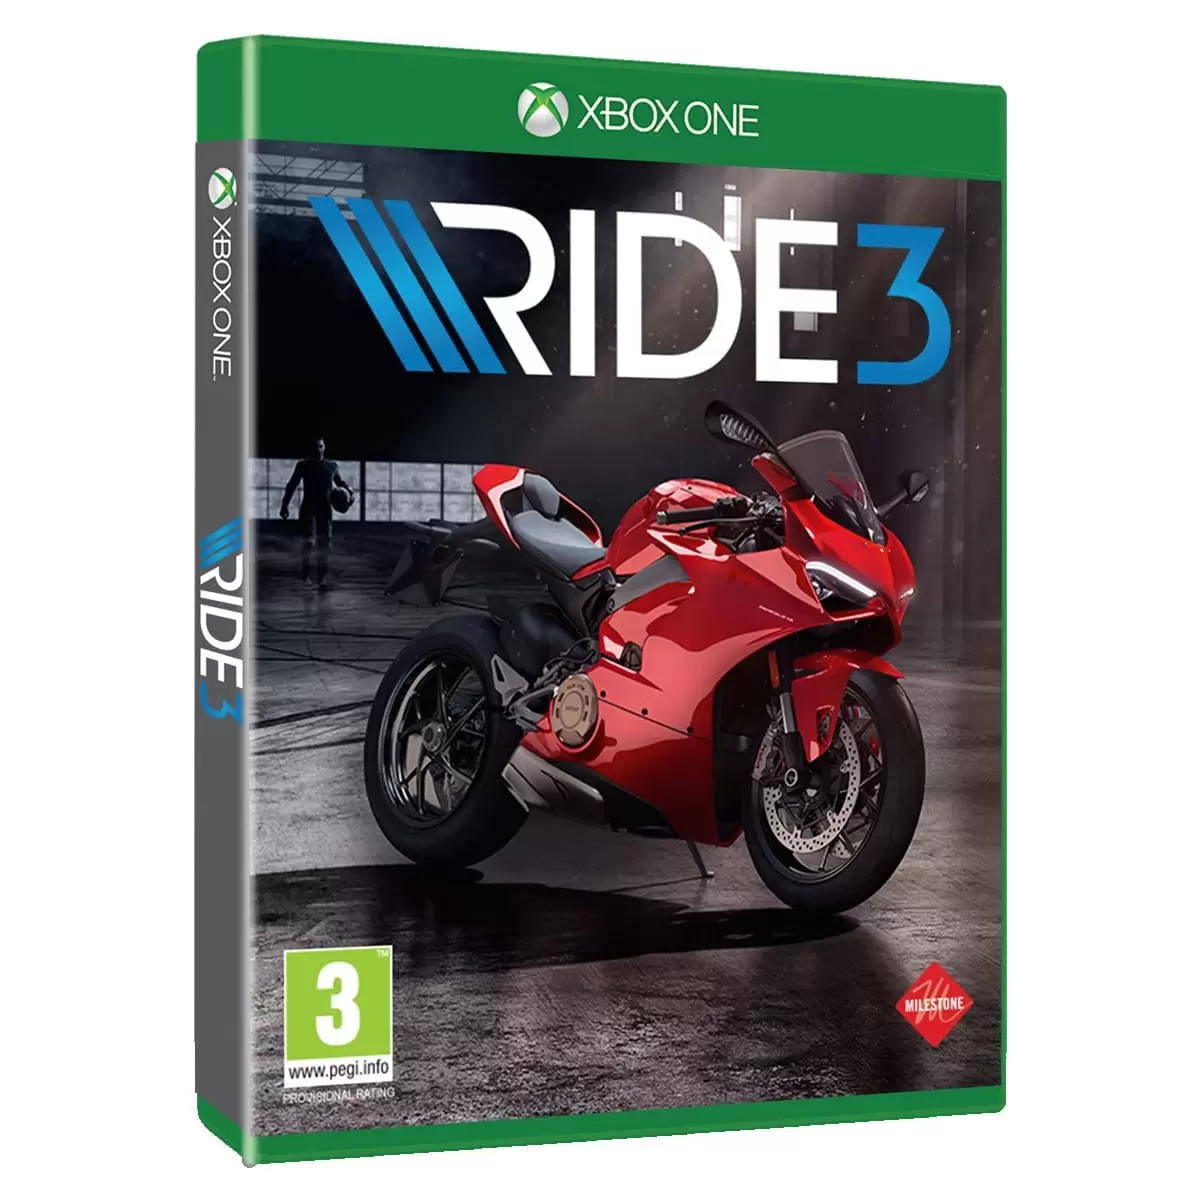 XBOX One Games - Ride 3